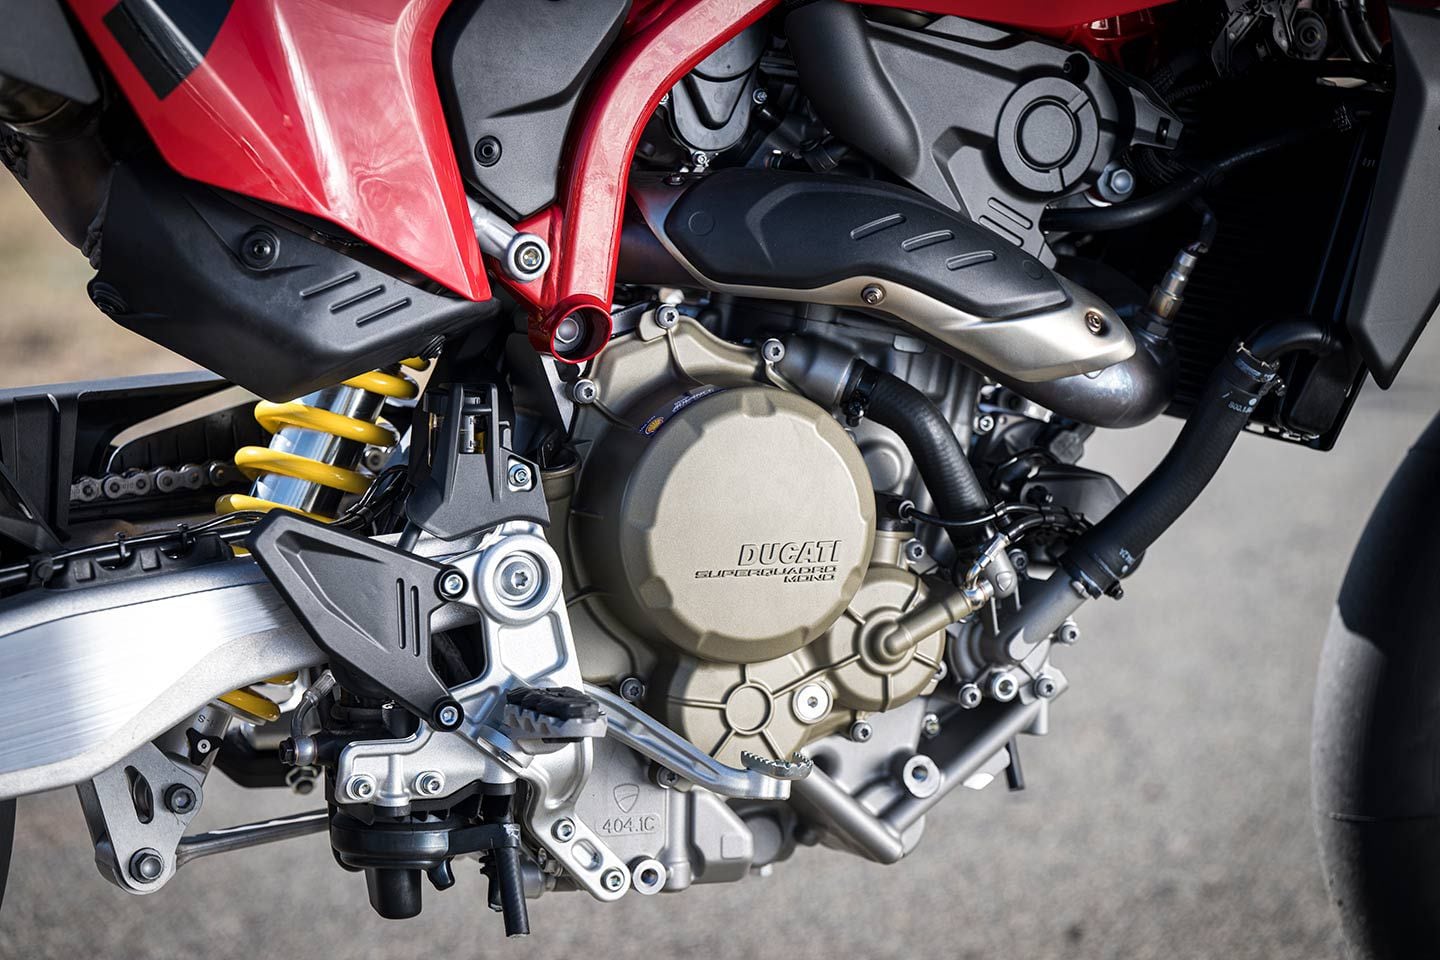 The heart of the Hyper Mono 698 is Ducati’s all-new Superquadro Mono single-cylinder engine, which is now the most powerful single-cylinder engine on the market, edging out the Austrian competition by a few (claimed) horsepower. It does, however, make a few less pound-feet of torque.